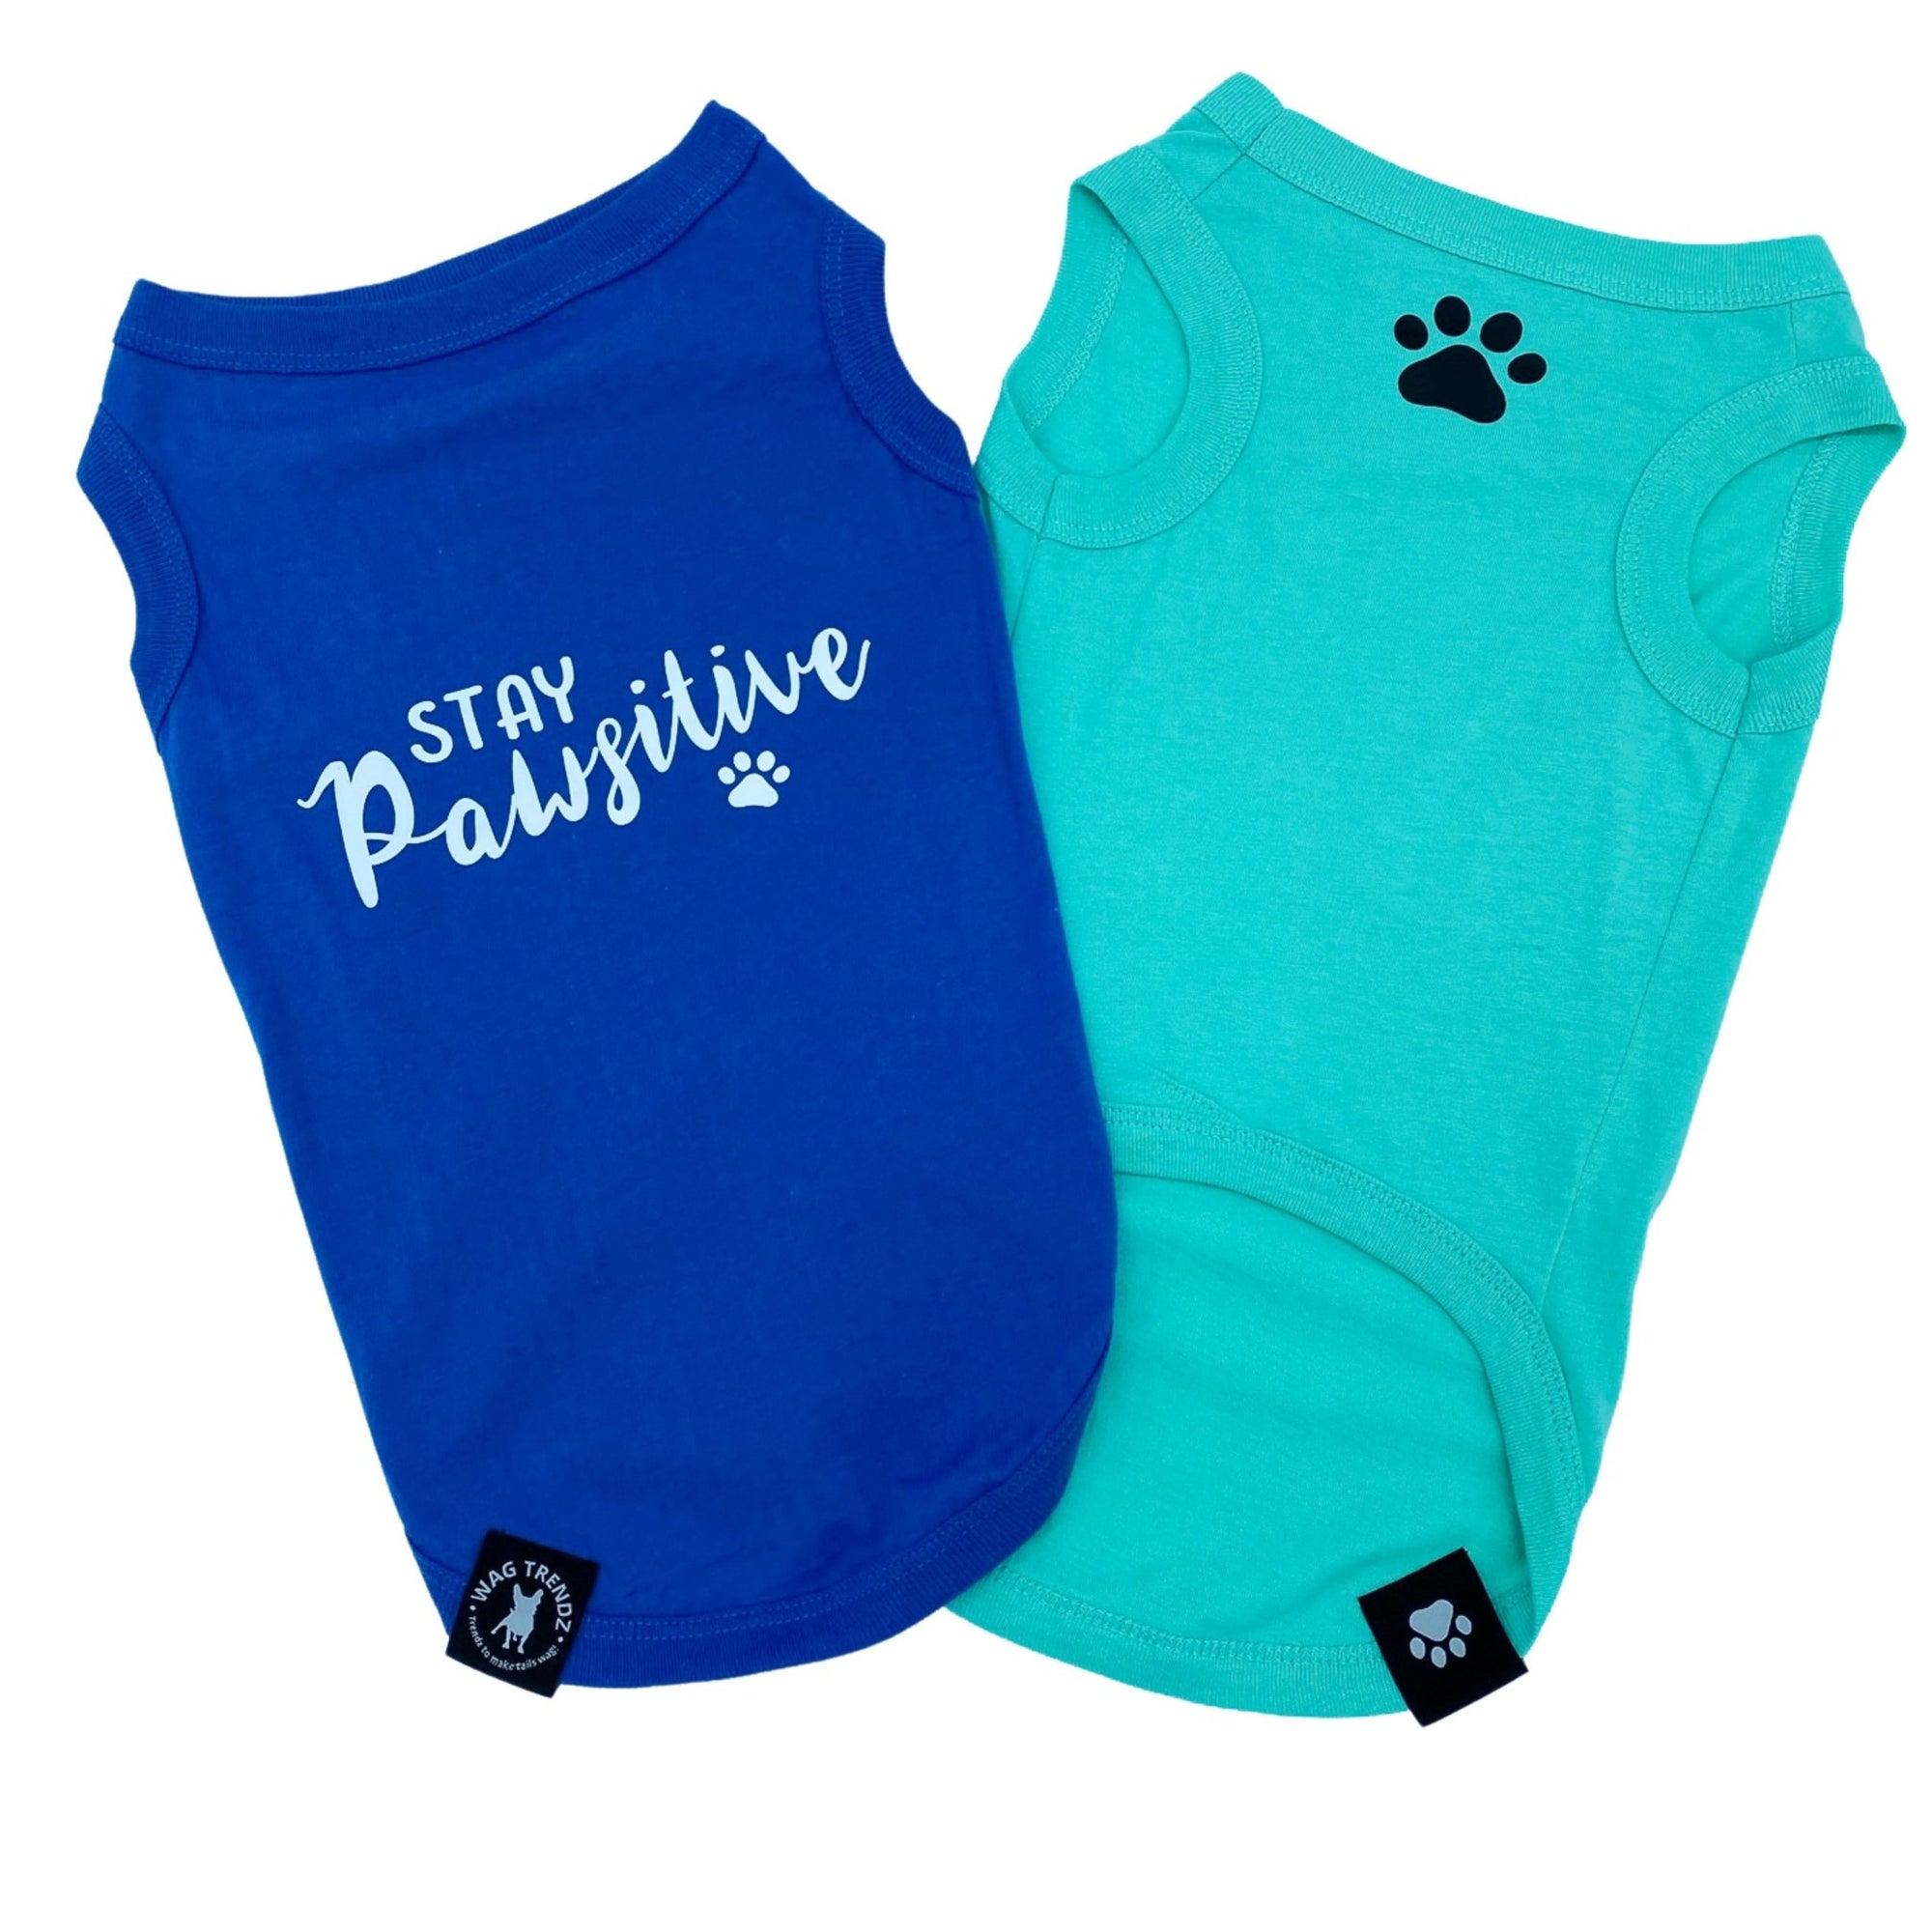 Dog T-Shirt - &quot;Stay Pawsitive&quot; - Royal Blue and Teal dog t-shirt - Stay Pawsitive lettering in white on blue t-shirt and a paw print emoji in black on chest of teal t-shirt - against solid white background - Wag Trendz